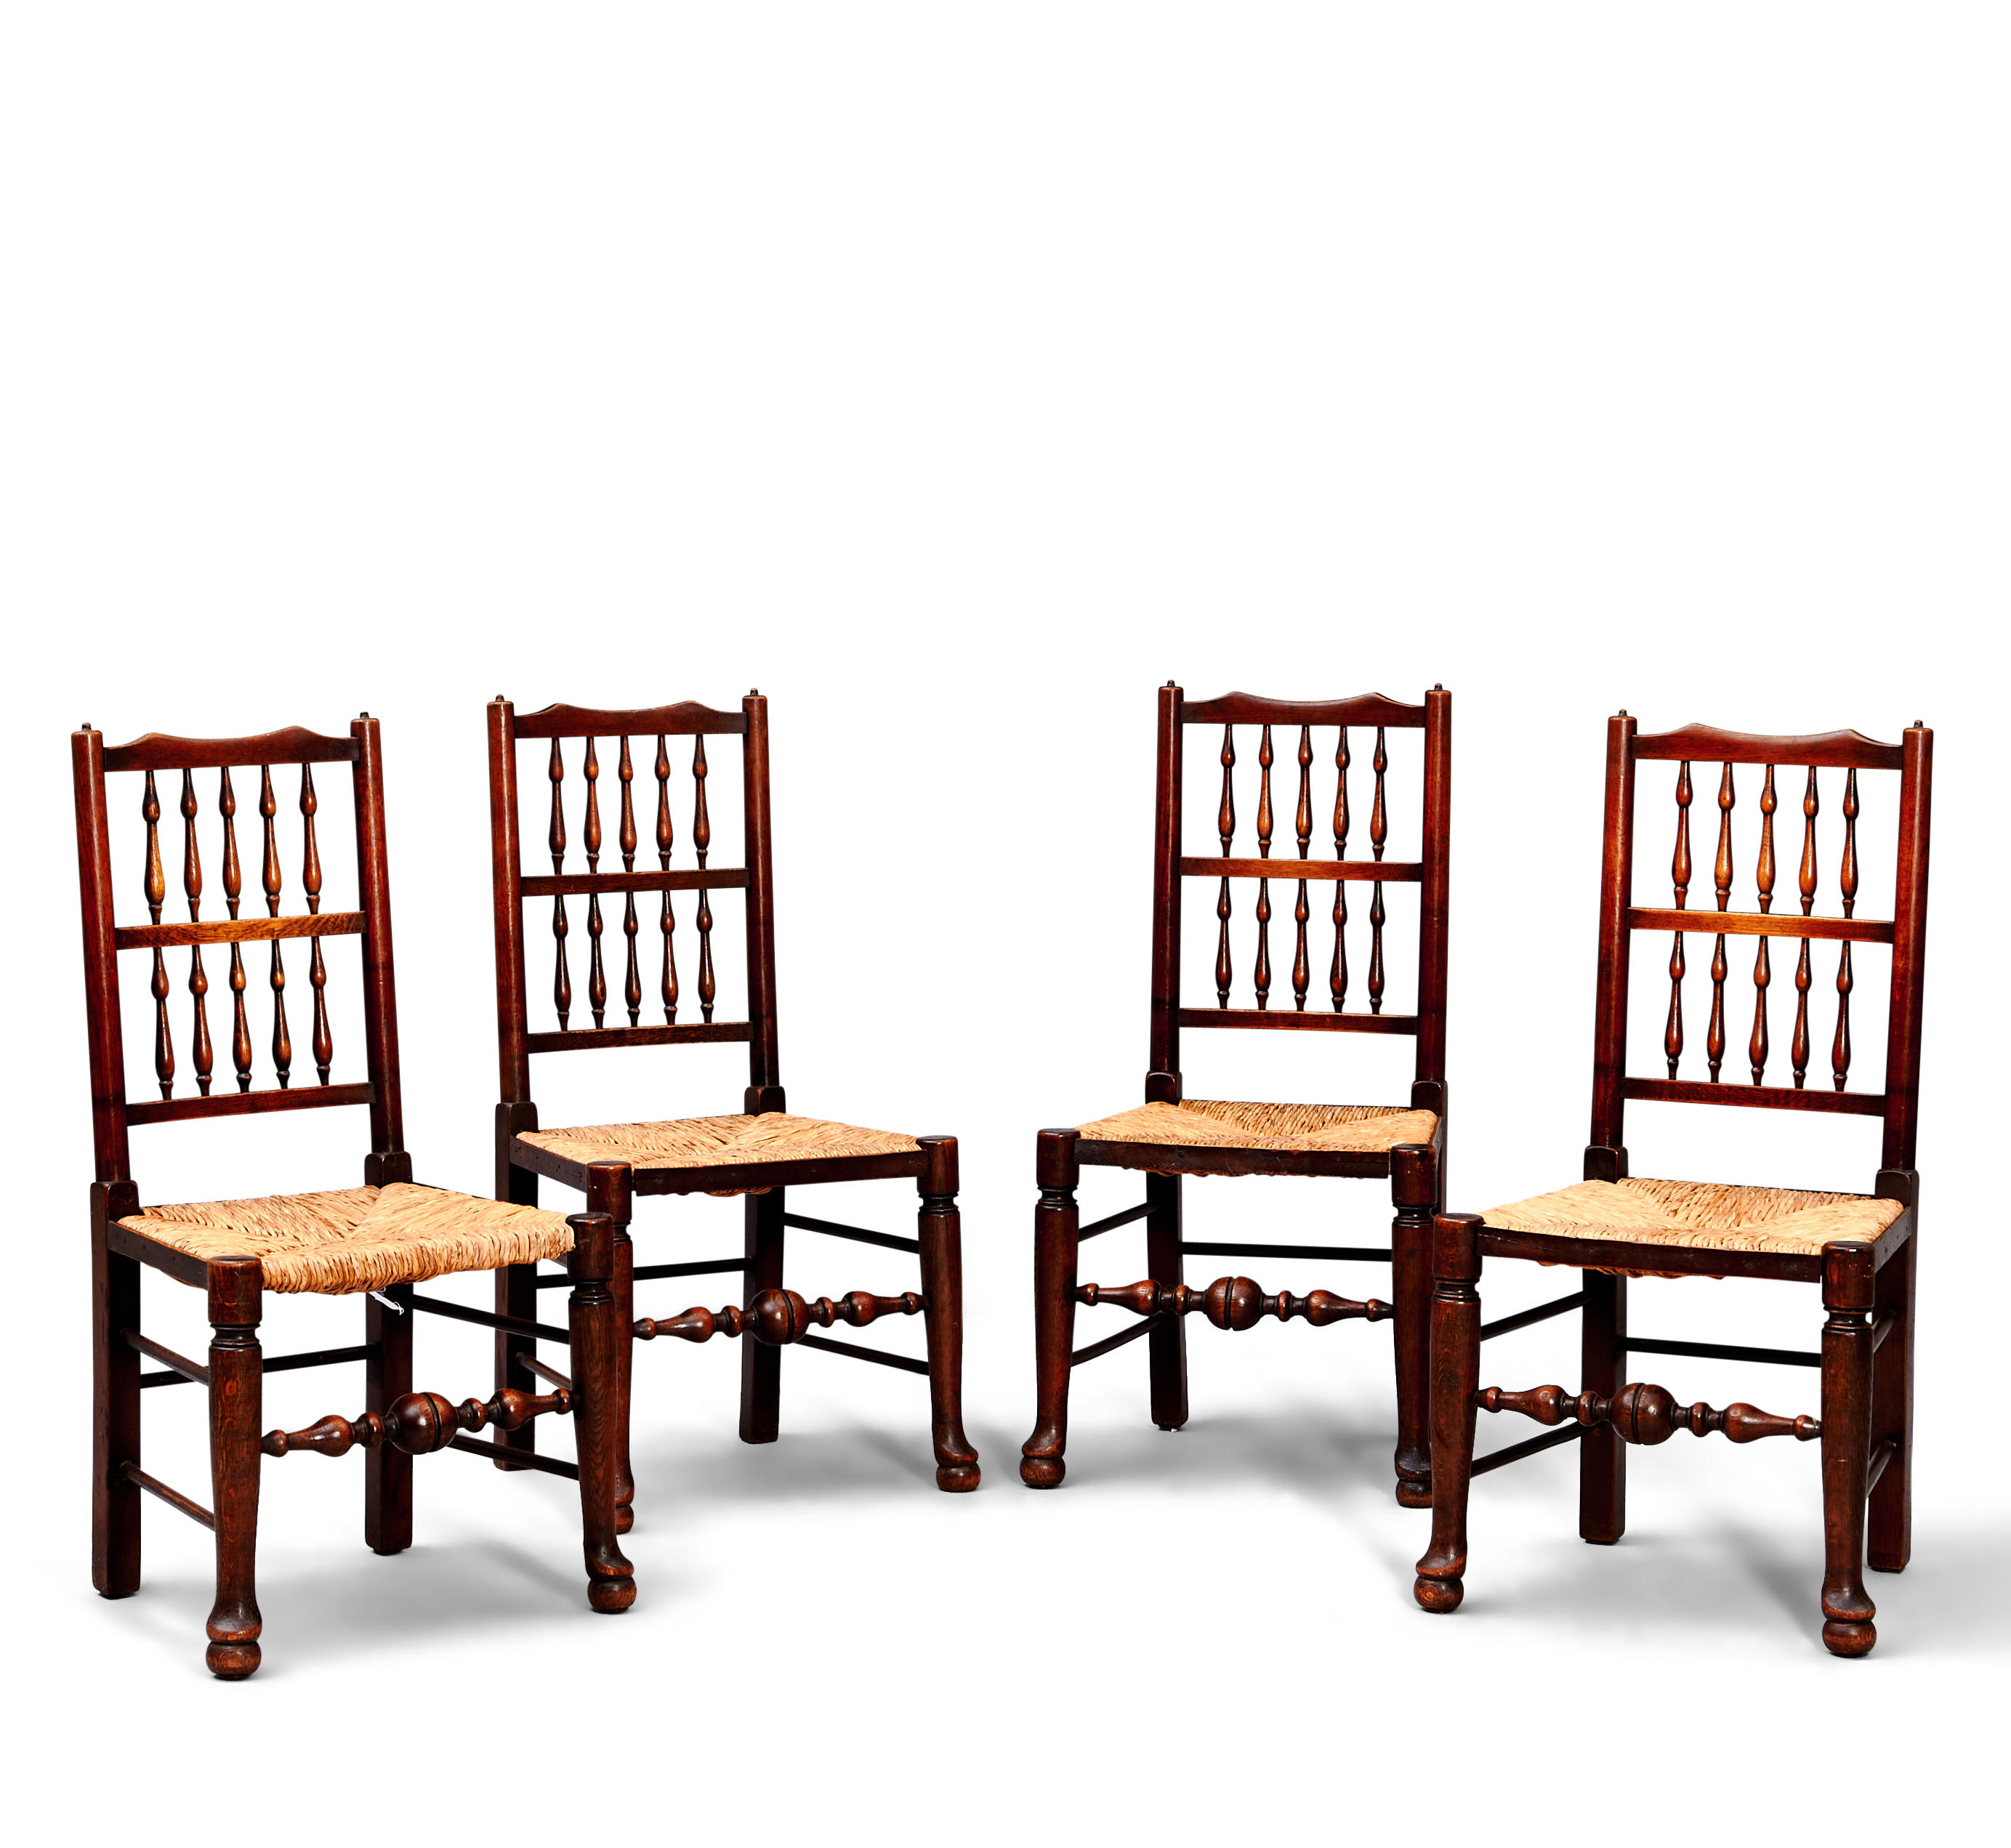 FOUR OAK SPINDLE BACK SIDE CHAIRS  3aeb2a